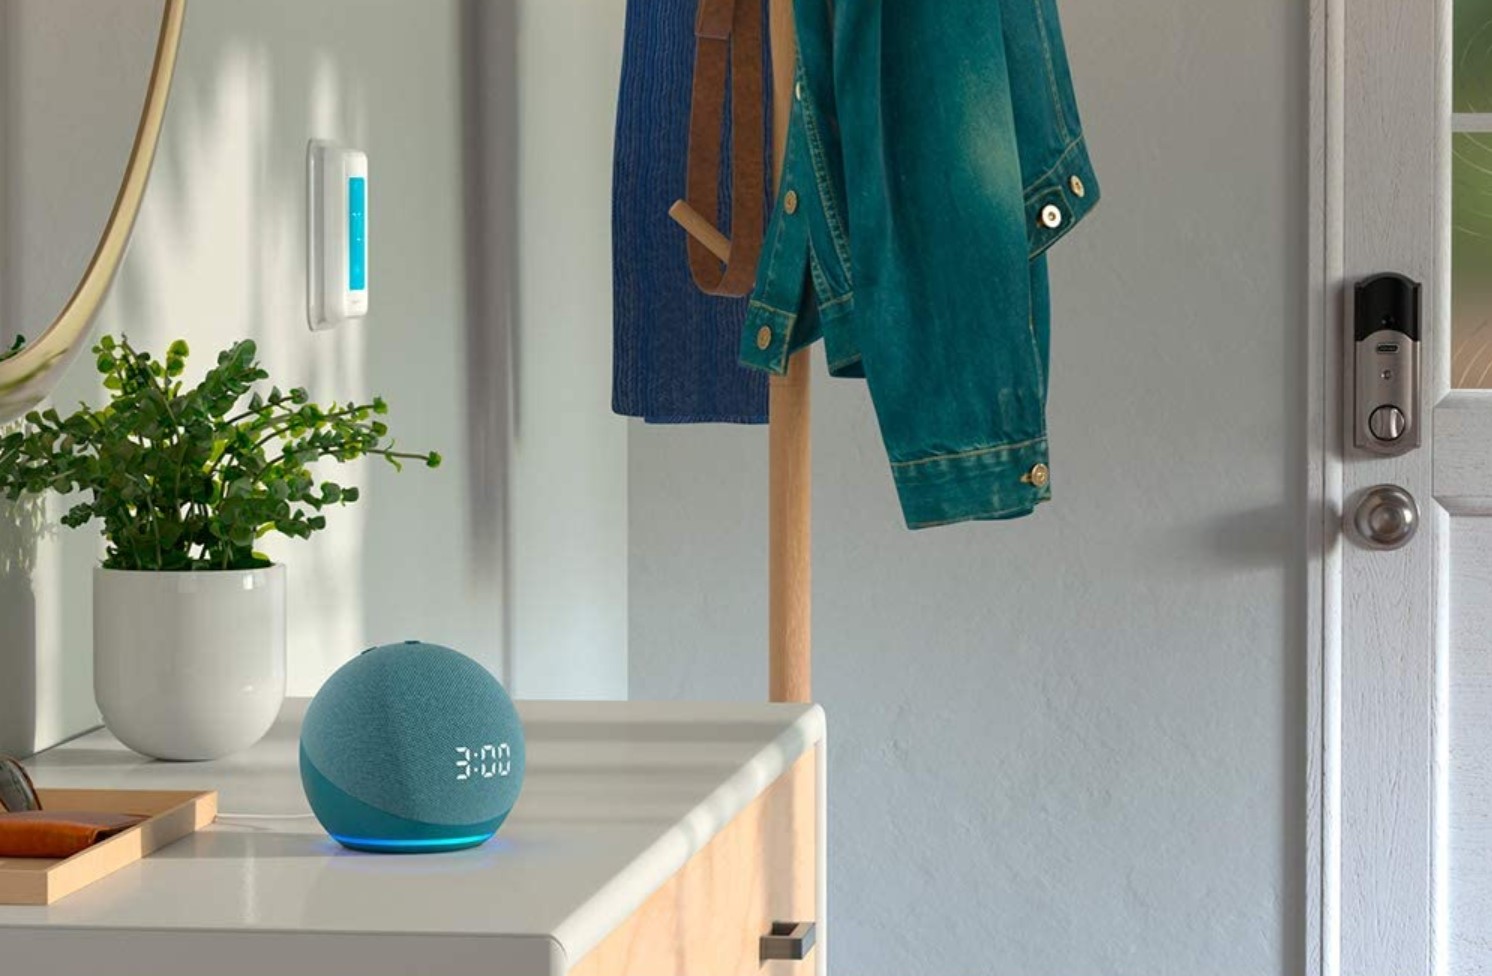 The 4th-gen Echo Dot with clock functions